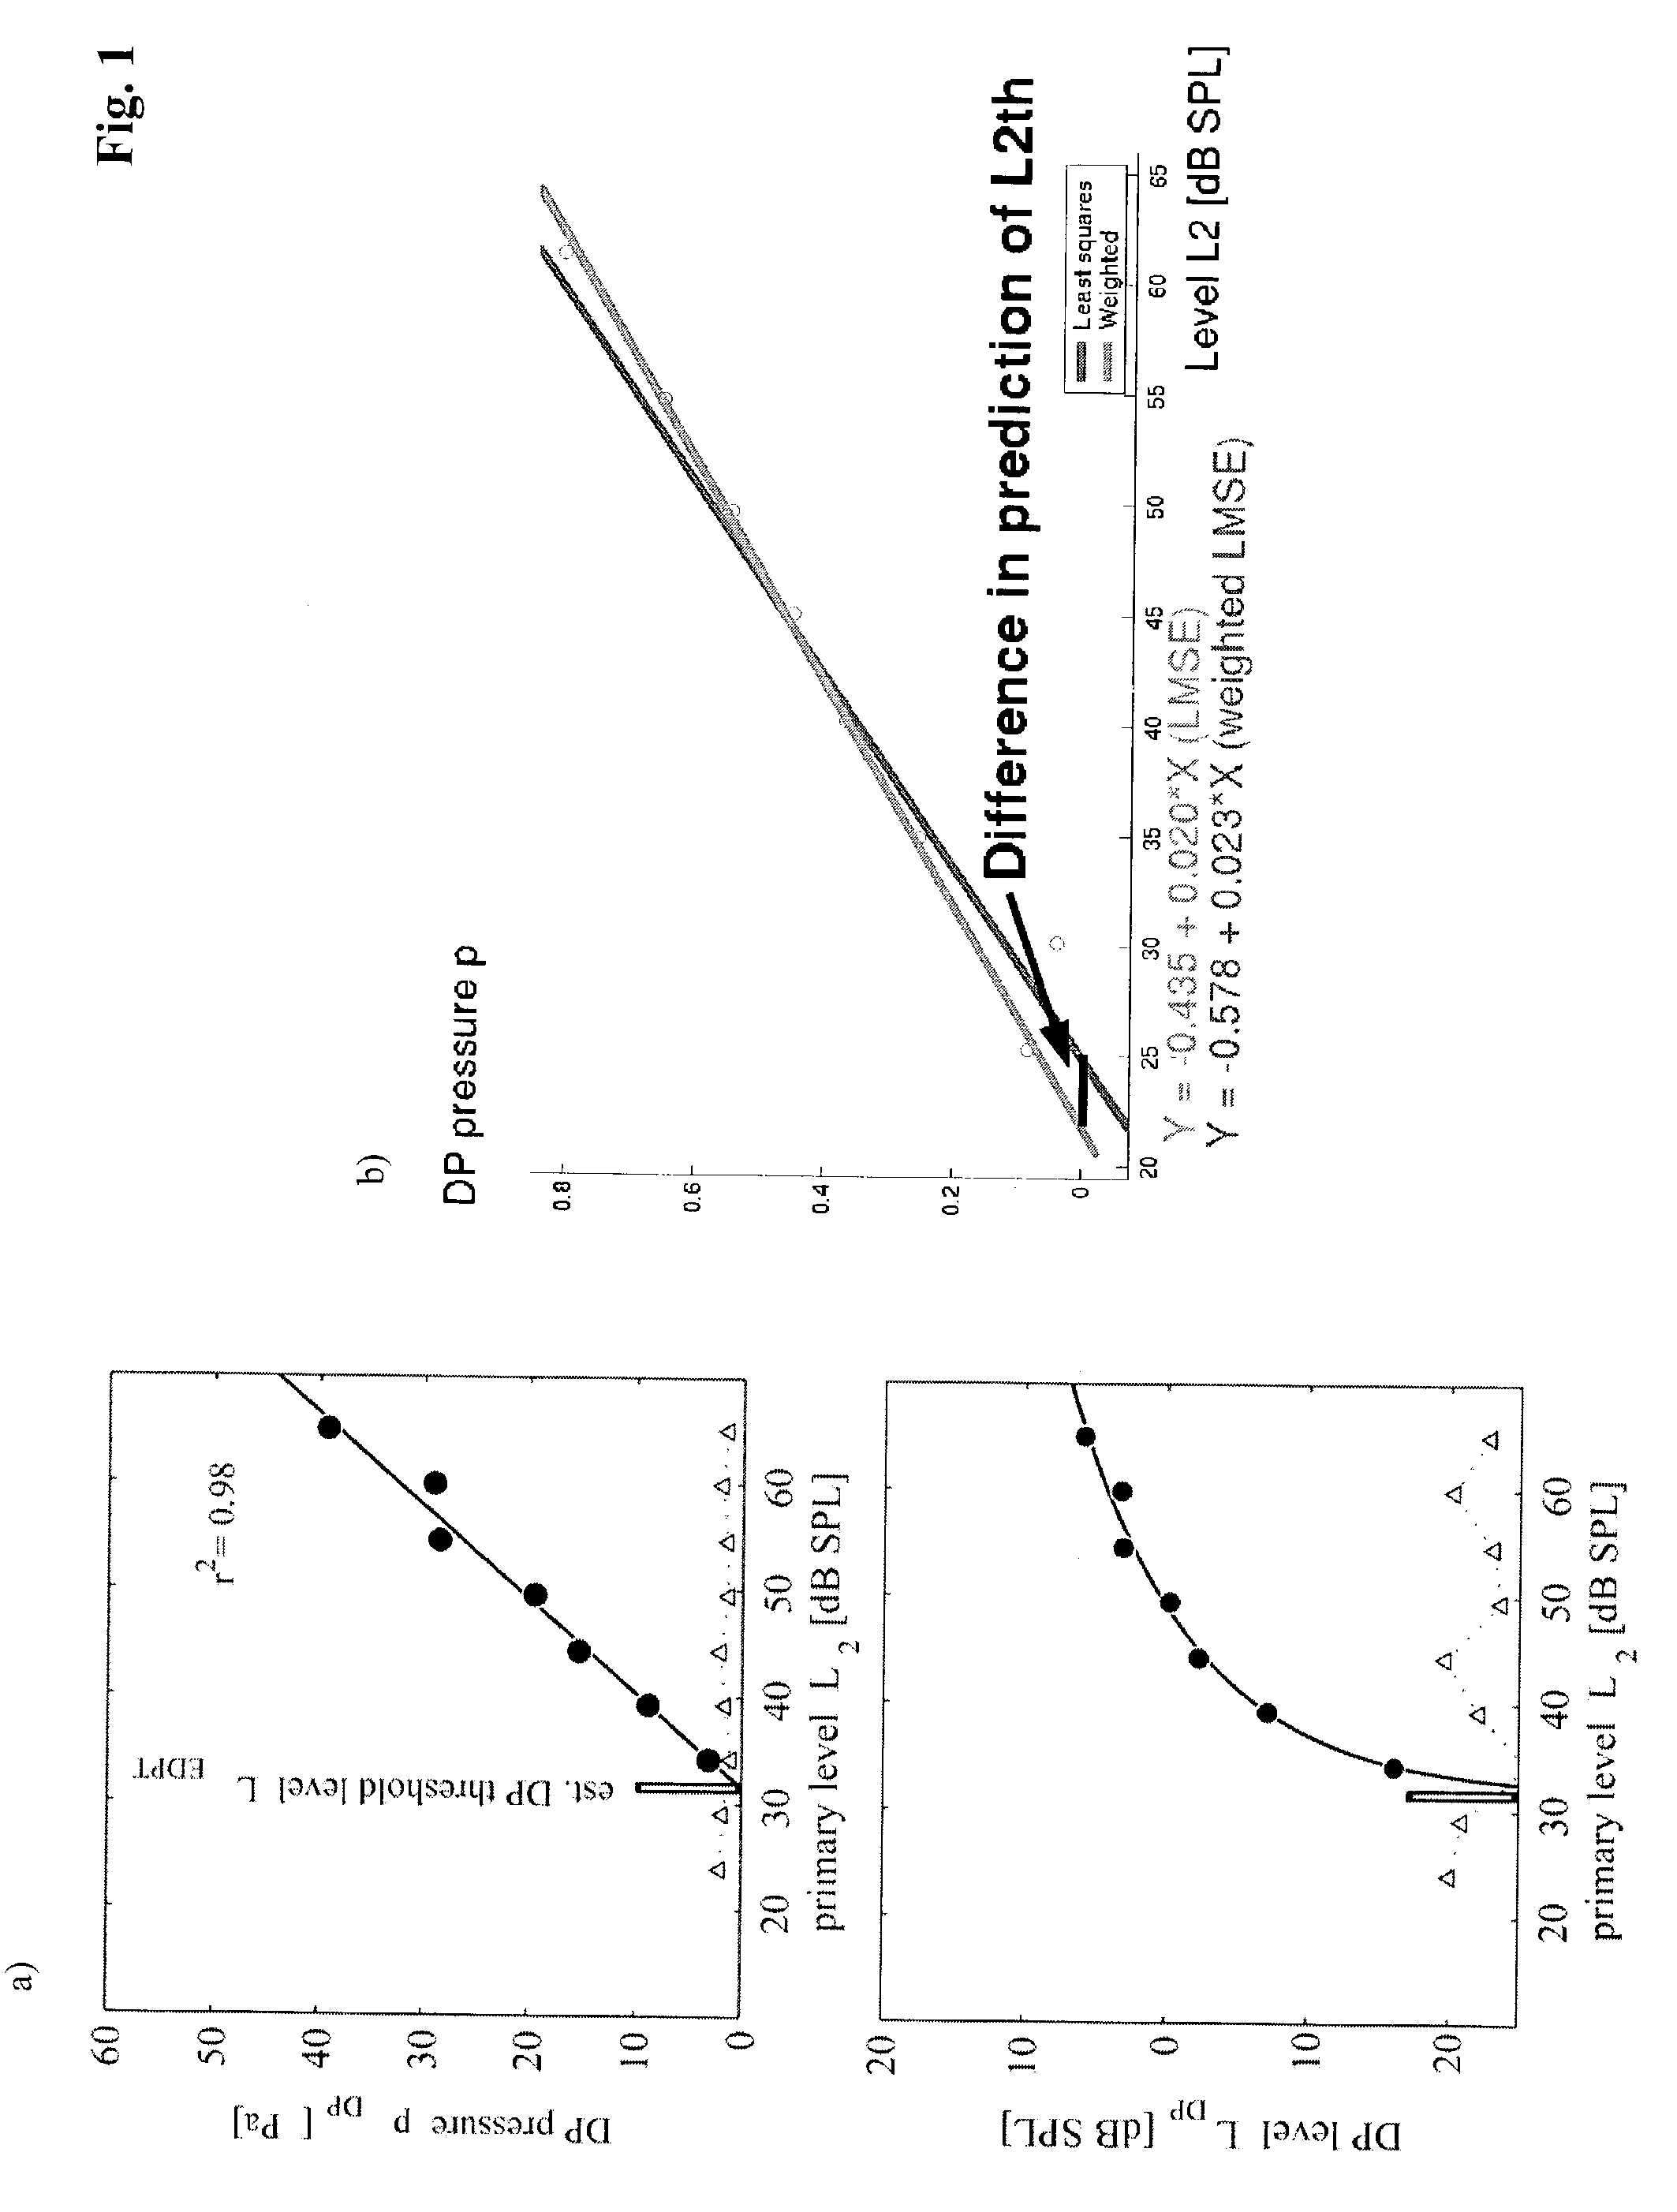 Method and apparatus for automatic non-cooperative frequency specific assessment of hearing impairment and fitting of hearing aids